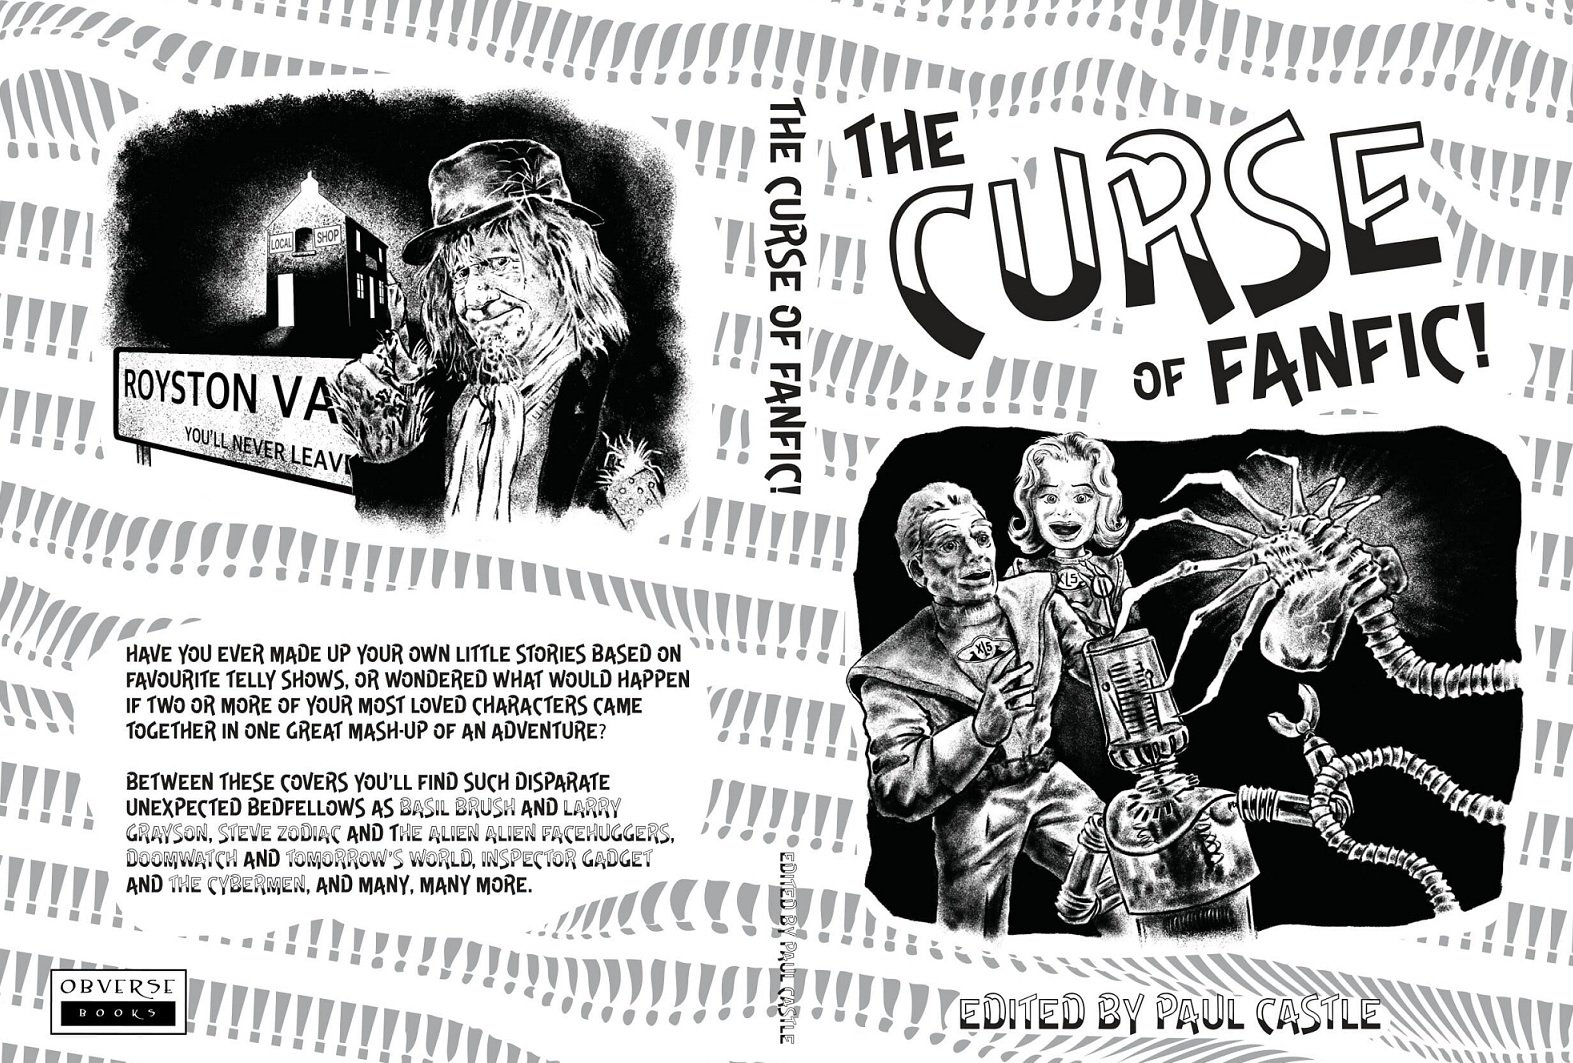 Available to Order Now: Obverse Books’ Charity Anthology, The Curse of Fanfic